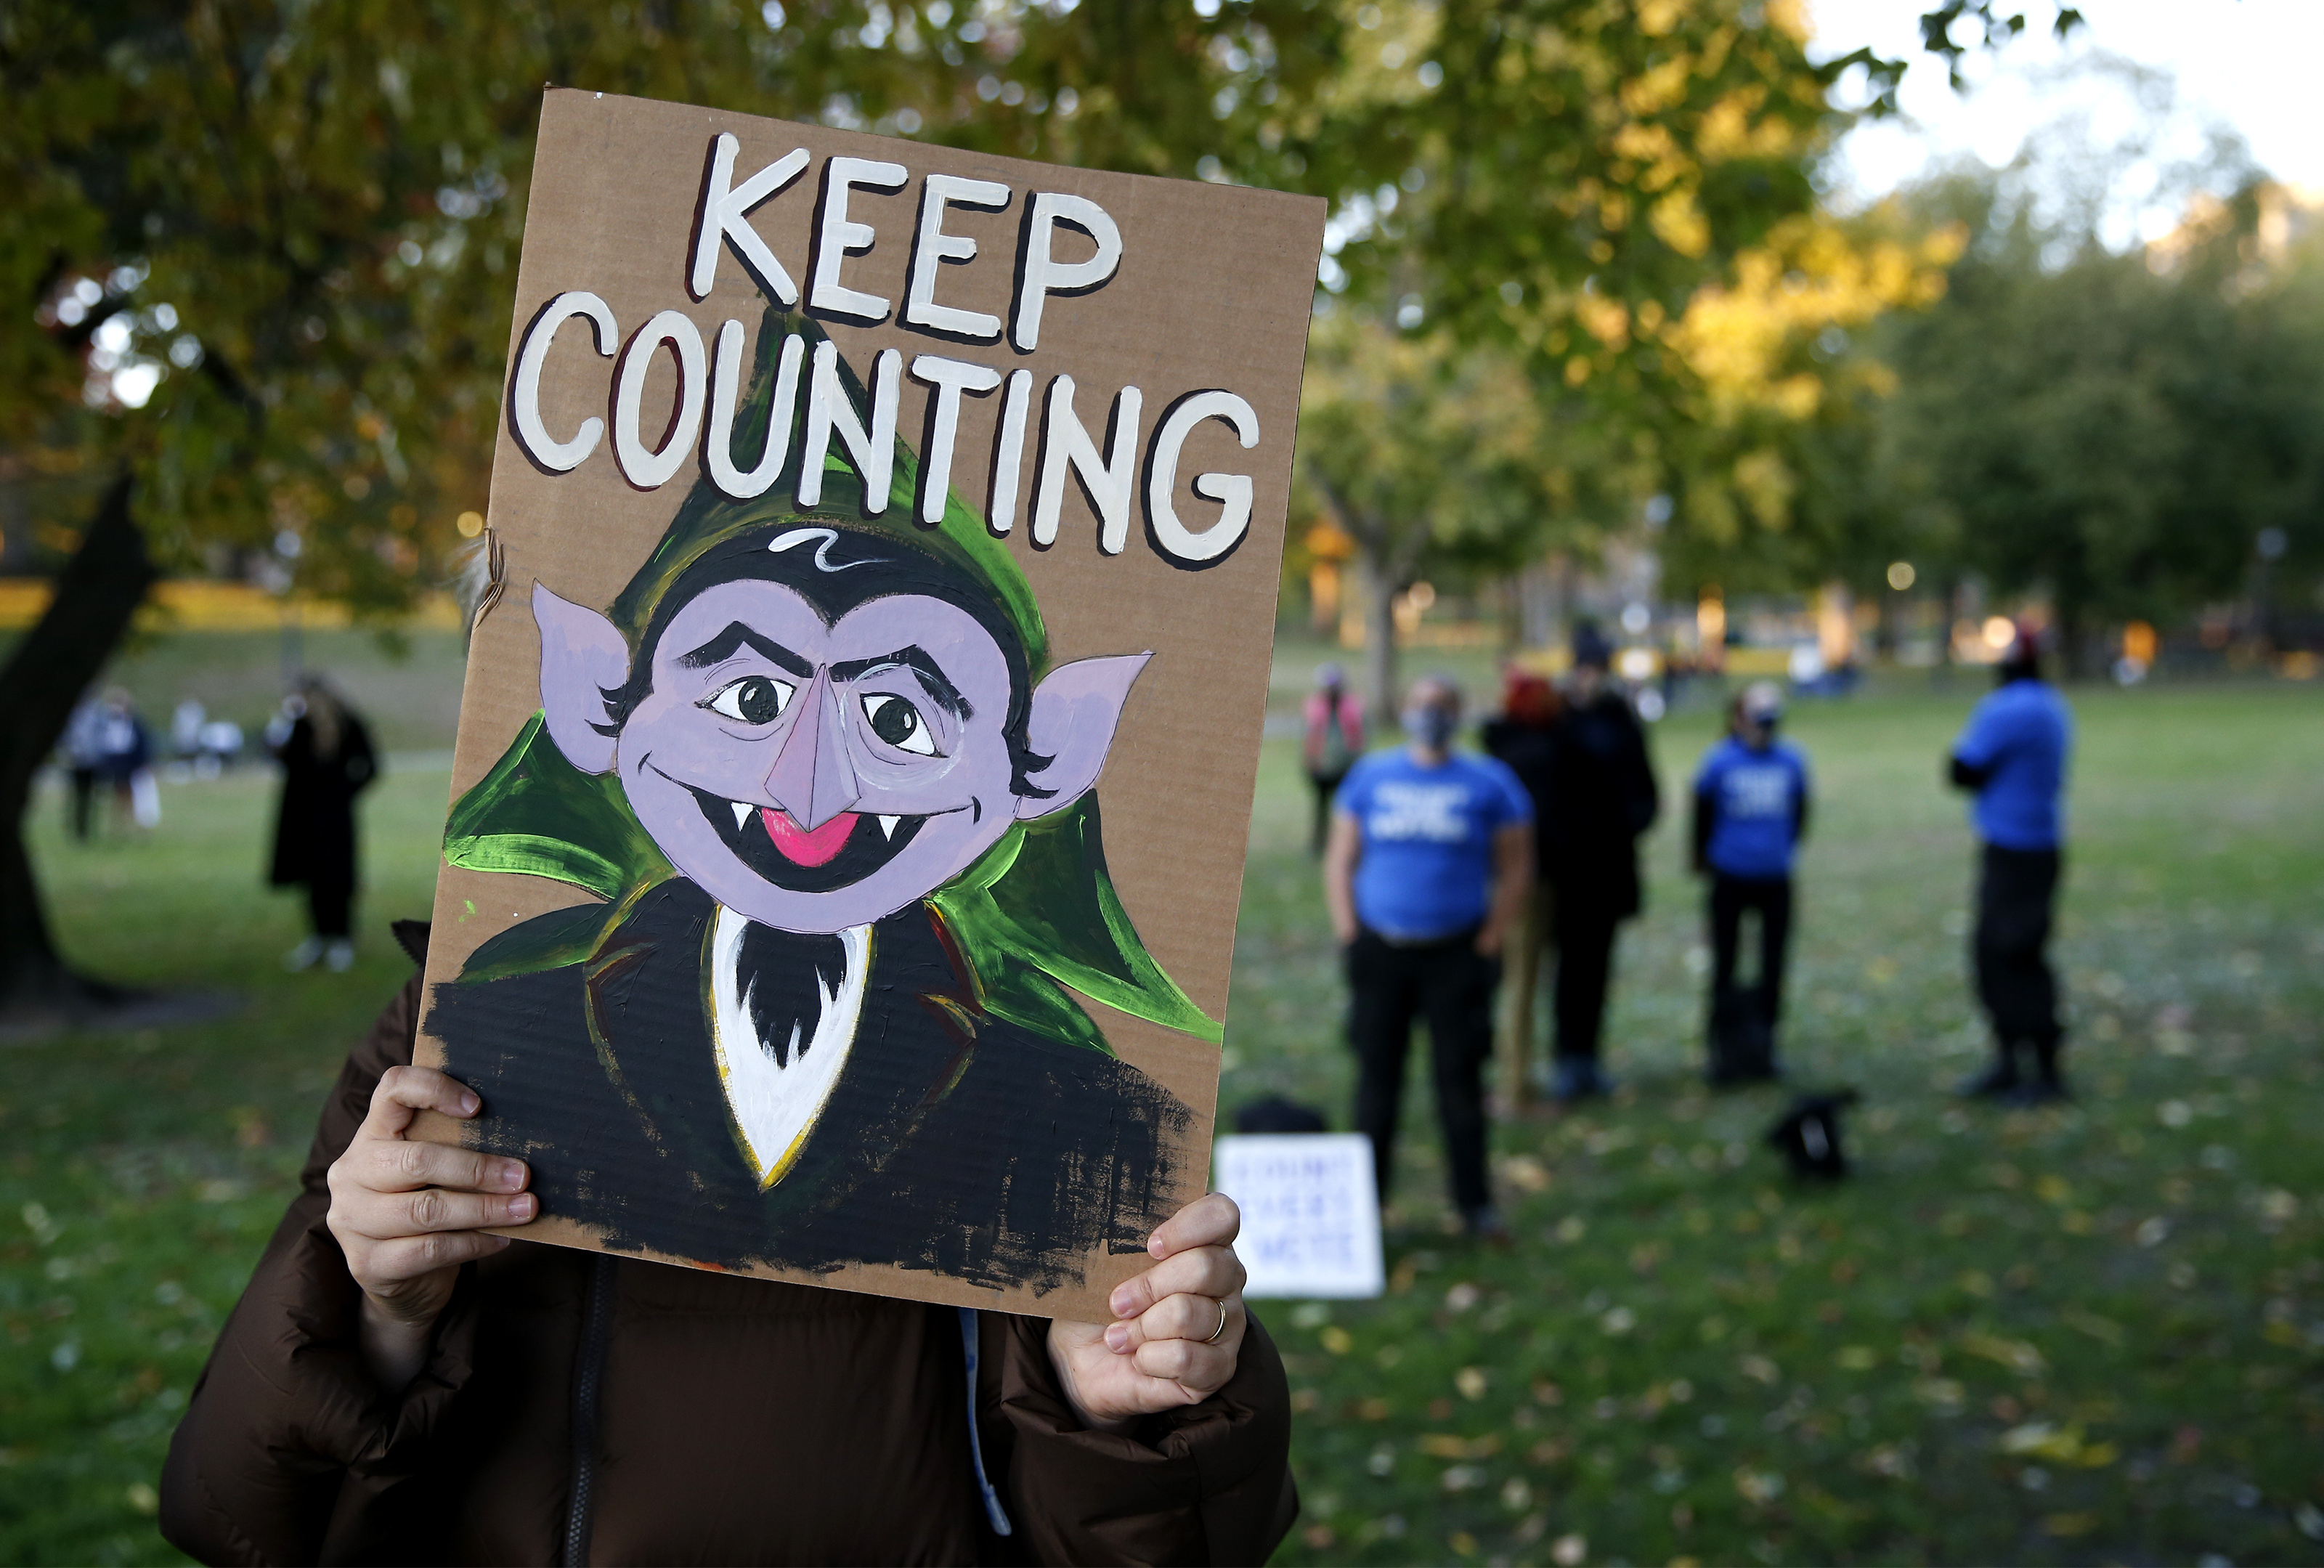 Sesame Street's Count von Count has become an election meme as tallies in  key states drag on - The Boston Globe